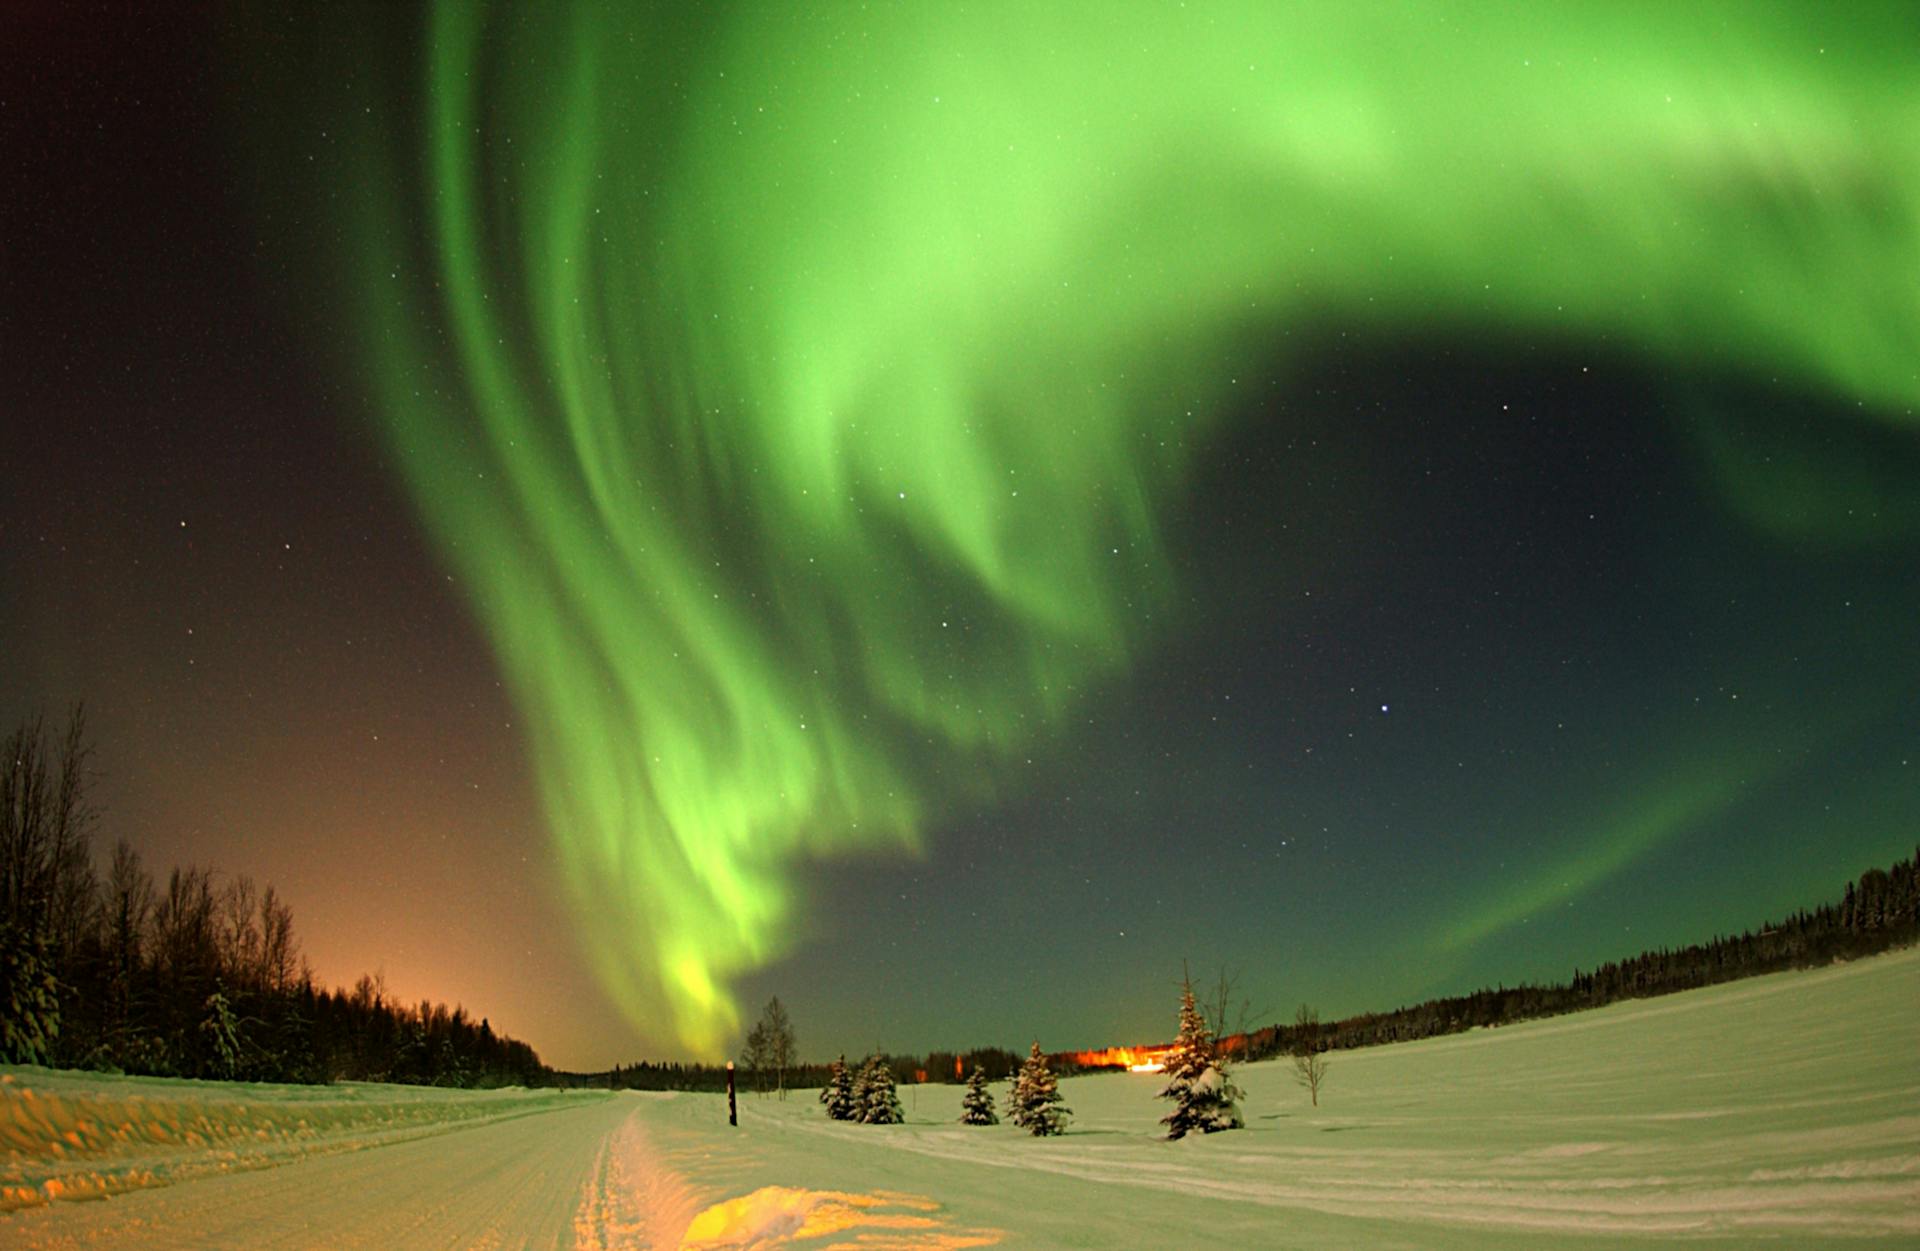 <p>Witness the breathtaking beauty of the aurora borealis, or Northern Lights, in places like Iceland, Canada or Norway. This natural phenomenon creates mesmerizing displays of colorful lights dancing across the night sky. Experiencing the Northern Lights is a magical adventure that connects you with the wonders of the universe.</p>